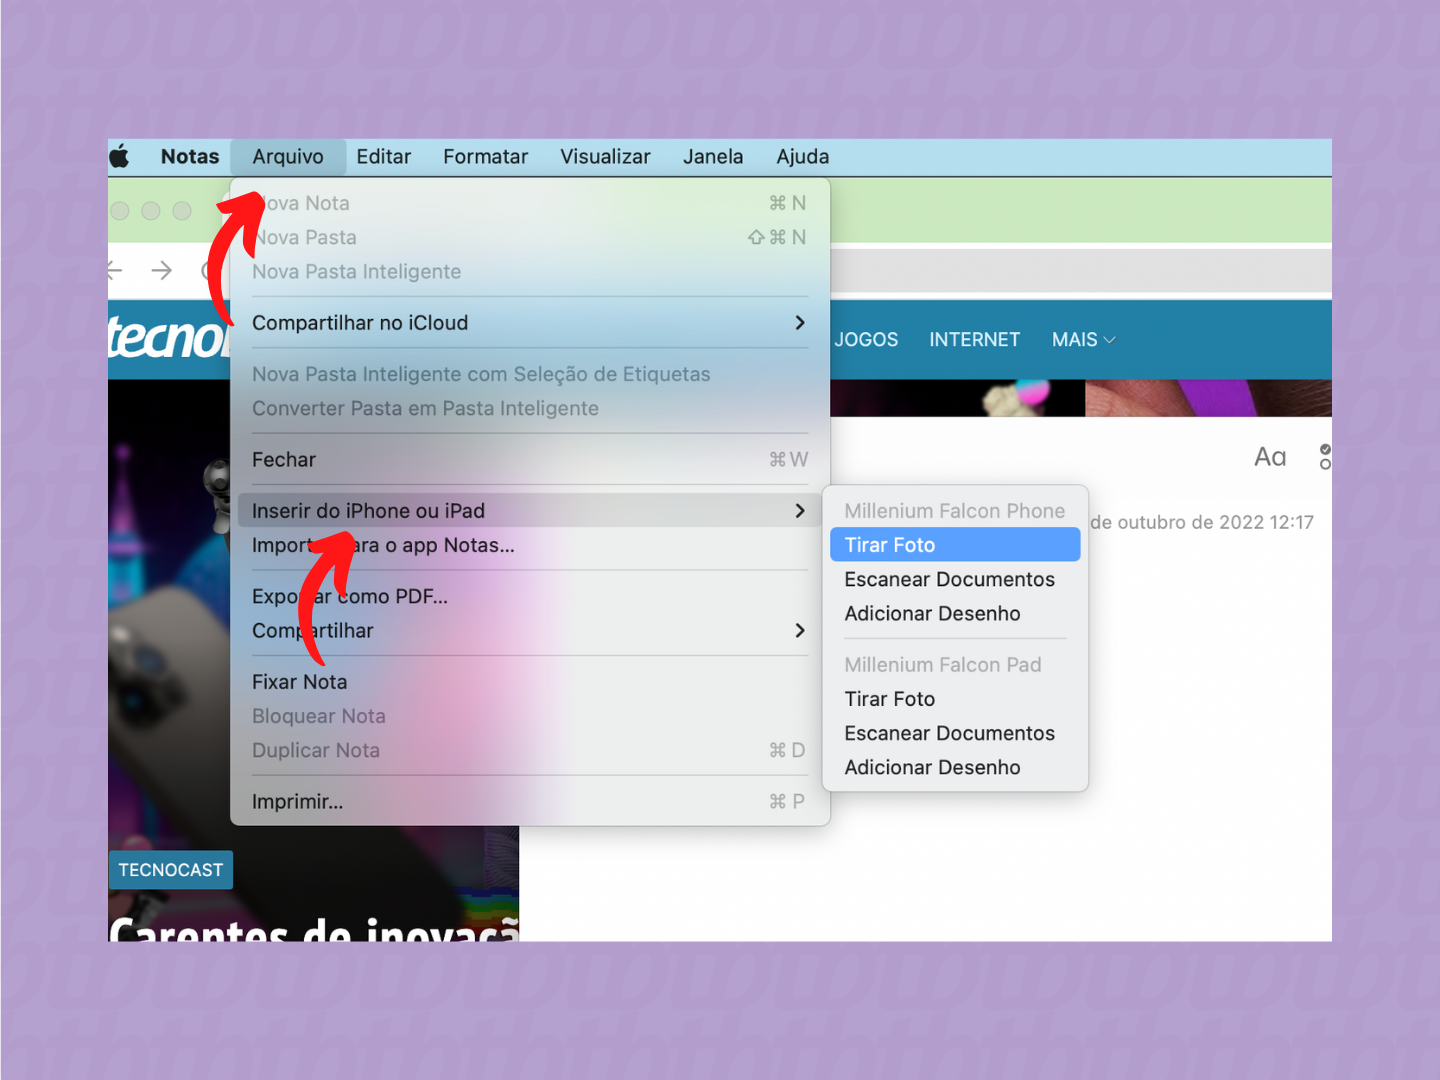 Access the option from the Mac menu (Image: Reproduction/APK Games)